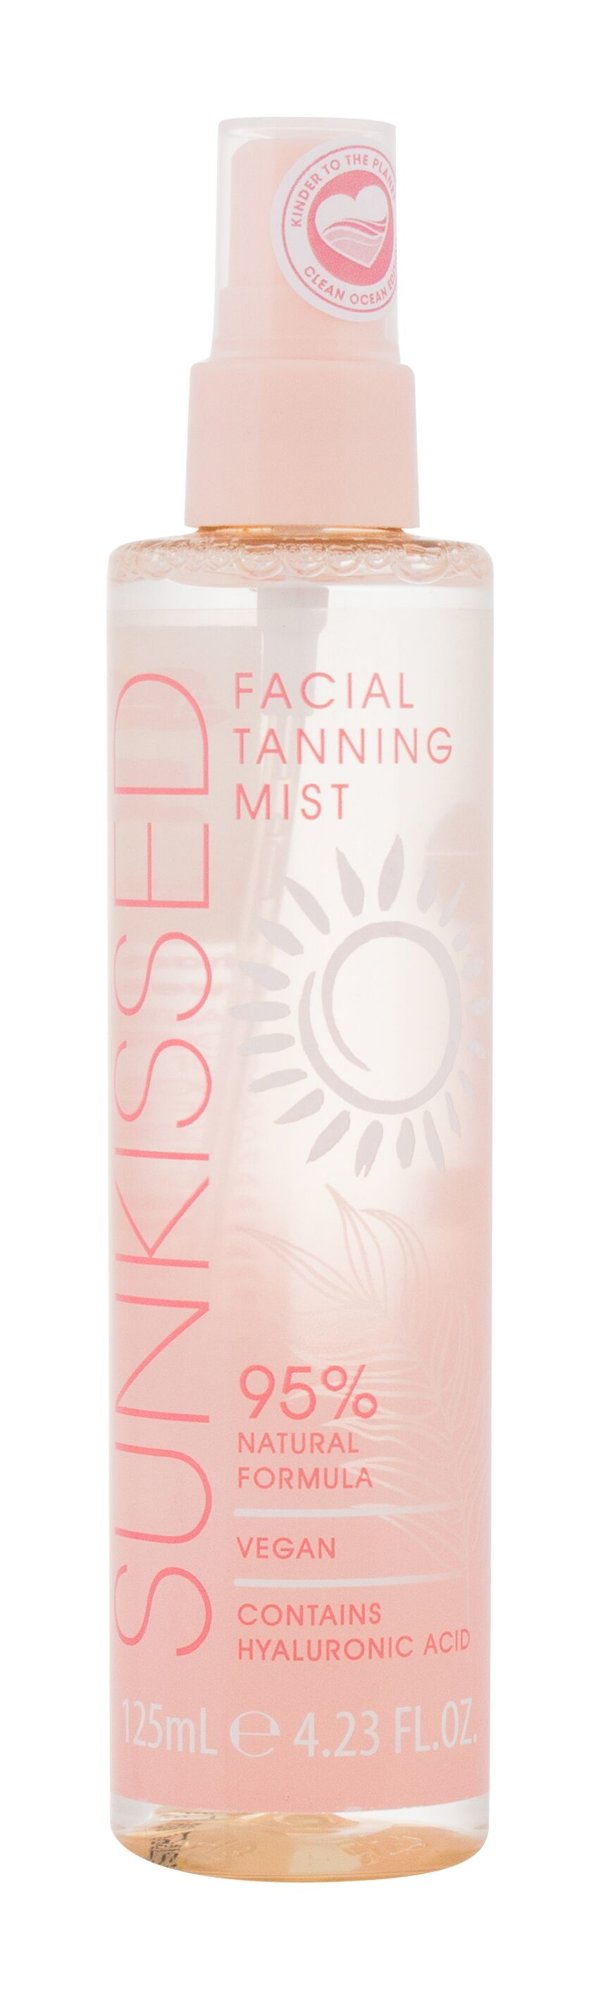 Sunkissed Facial Tanning Mist